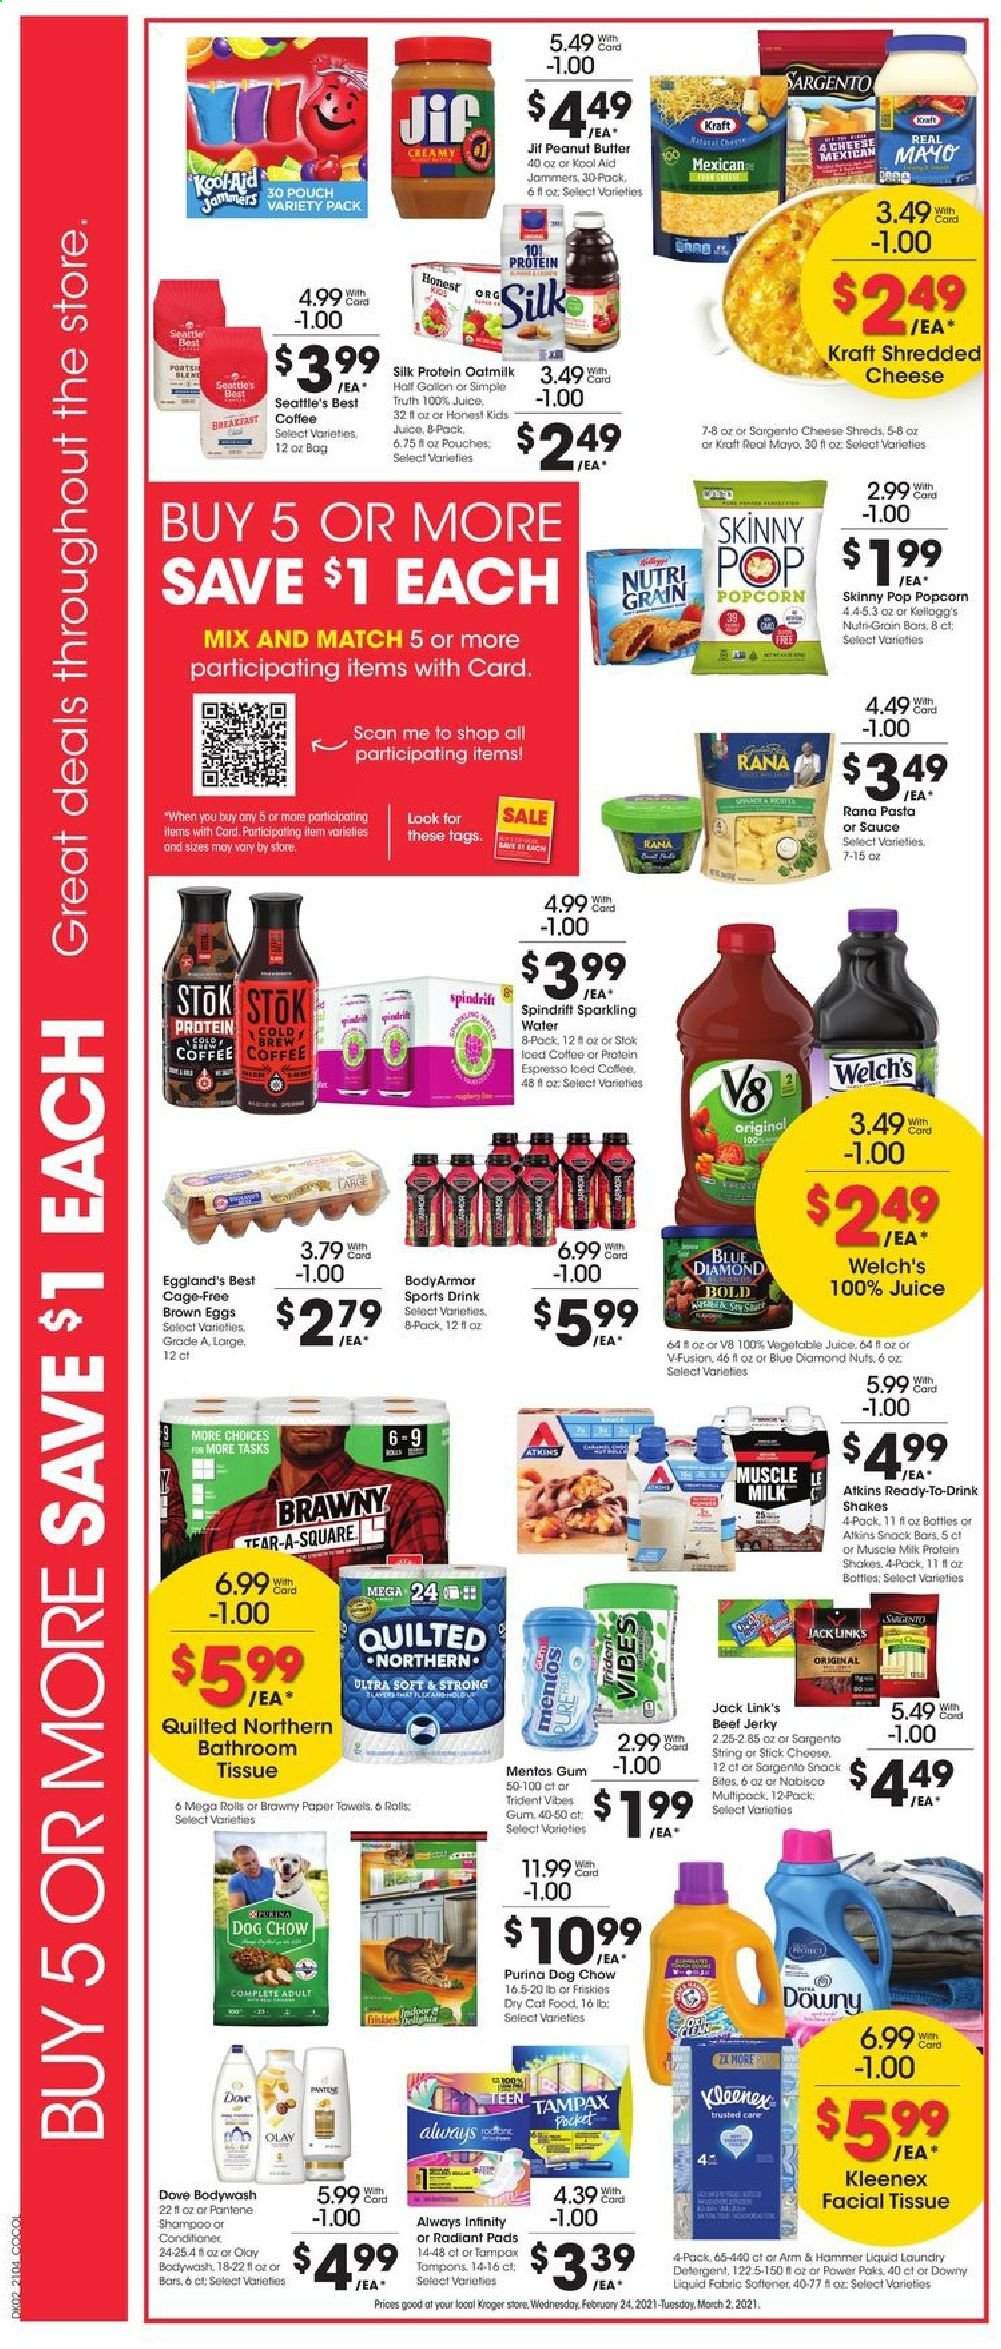 thumbnail - Kroger Flyer - 02/24/2021 - 03/02/2021 - Sales products - gallon, Welch's, Giovanni Rana, Kraft®, beef jerky, jerky, shredded cheese, Sargento, protein drink, Silk, shake, oat milk, eggs, mayonnaise, Mentos, Kellogg's, Trident, snack, popcorn, Skinny Pop, Jack Link's, ARM & HAMMER, Nutri-Grain, pasta, Rana, peanut butter, Jif, Blue Diamond, juice, vegetable juice, Spindrift, sparkling water, iced coffee, Dove, bath tissue, Kleenex, Quilted Northern, tissues, detergent, laundry detergent, shampoo, Tampax, tampons, Always Infinity, Olay, Pantene, paper, cage, animal food, cat food, Dog Chow, Purina, dry cat food. Page 3.